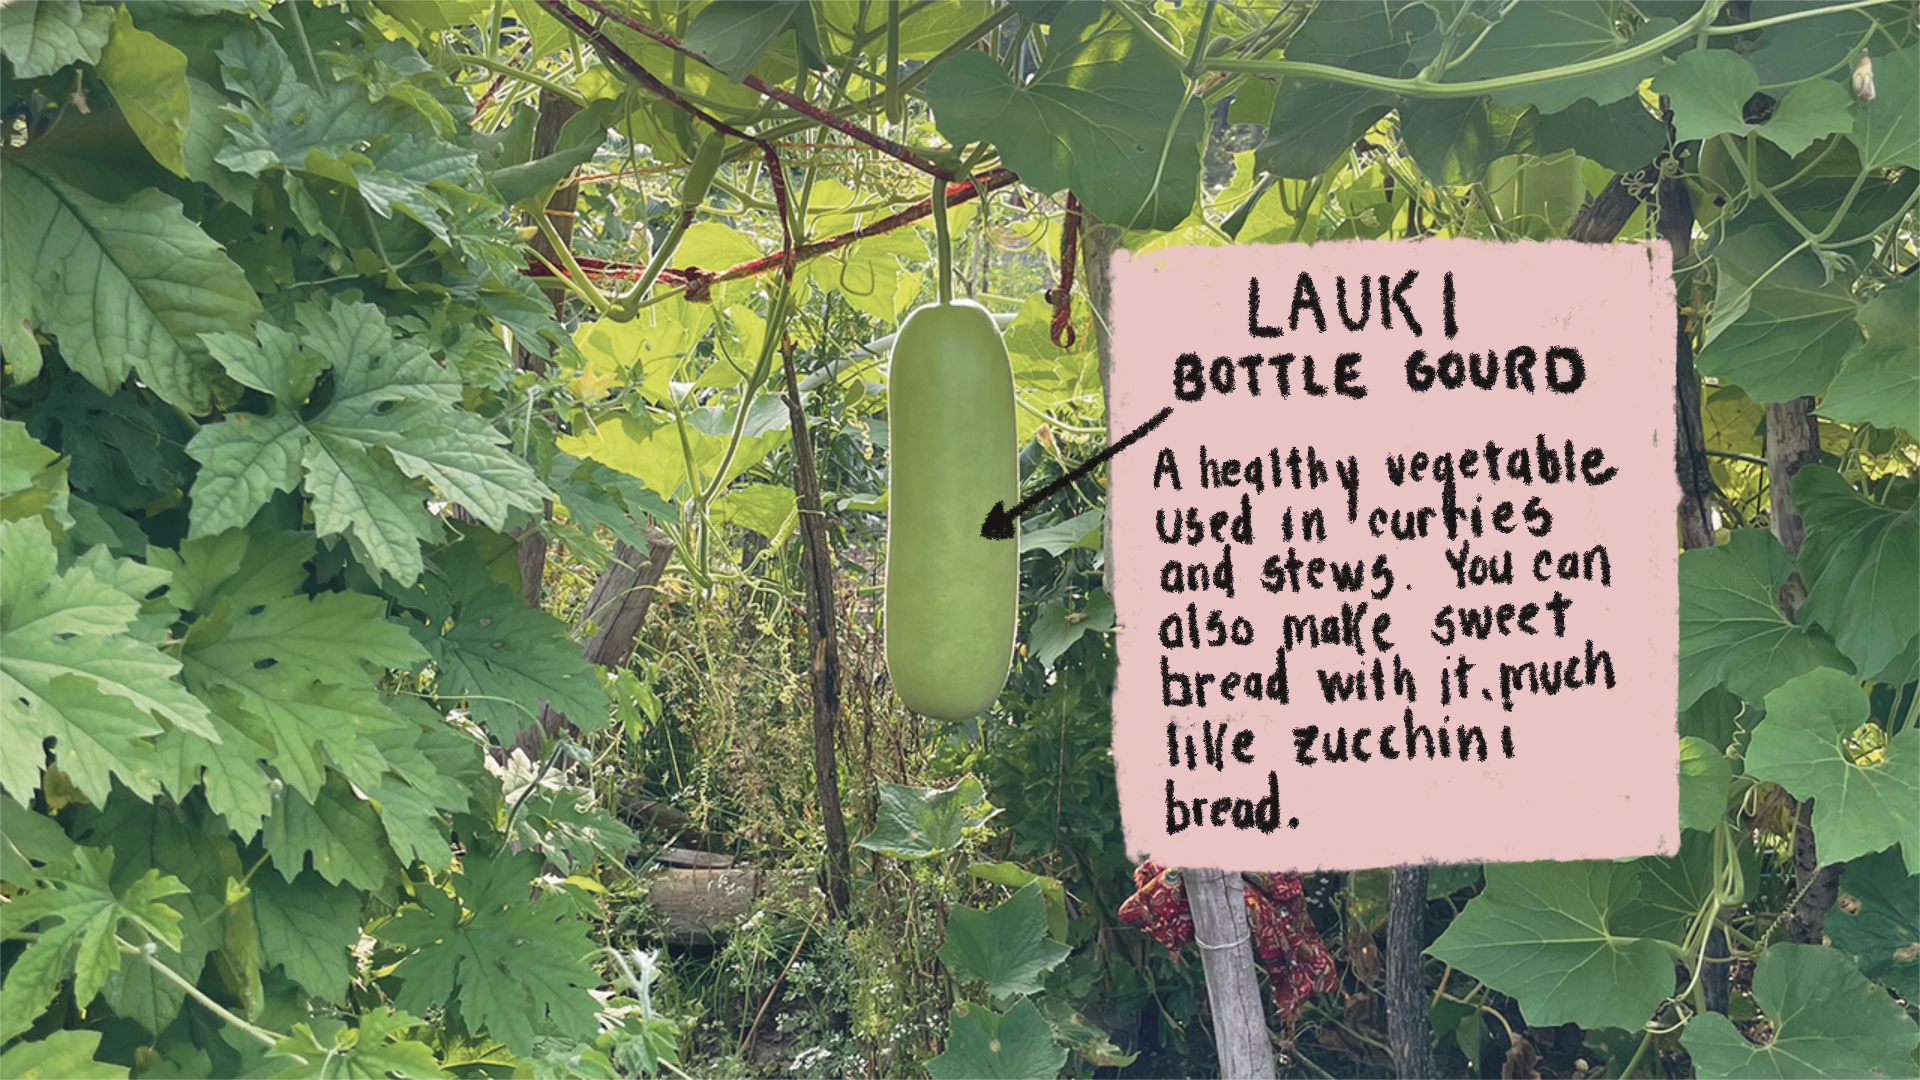 A photo of a Lauki or a Bottle Gourd with a lable on which is hand written: "A healthy vegetable used in curries and stews. You can also make sweet bread with it much like Zucchini bread.